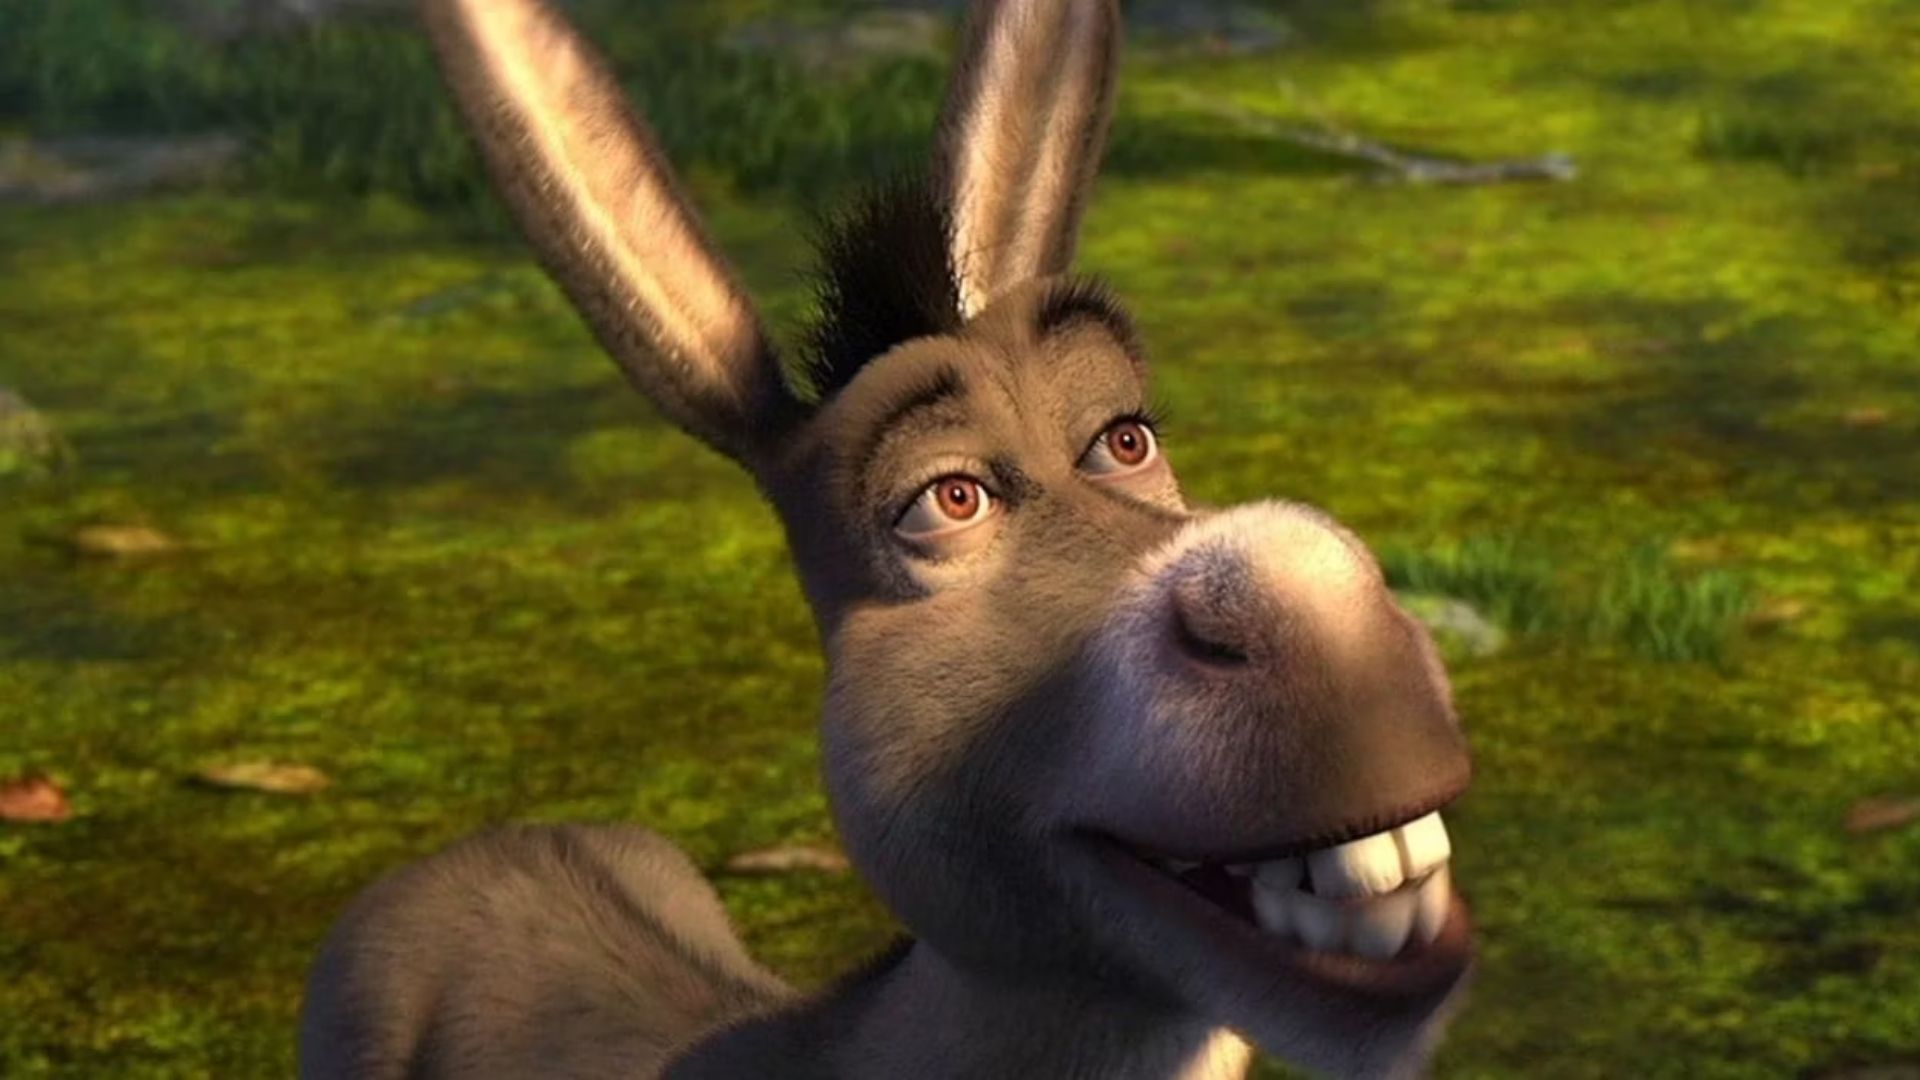 Eddie Murphy Confirms Both Shrek 5 and a Donkey Spin-Off